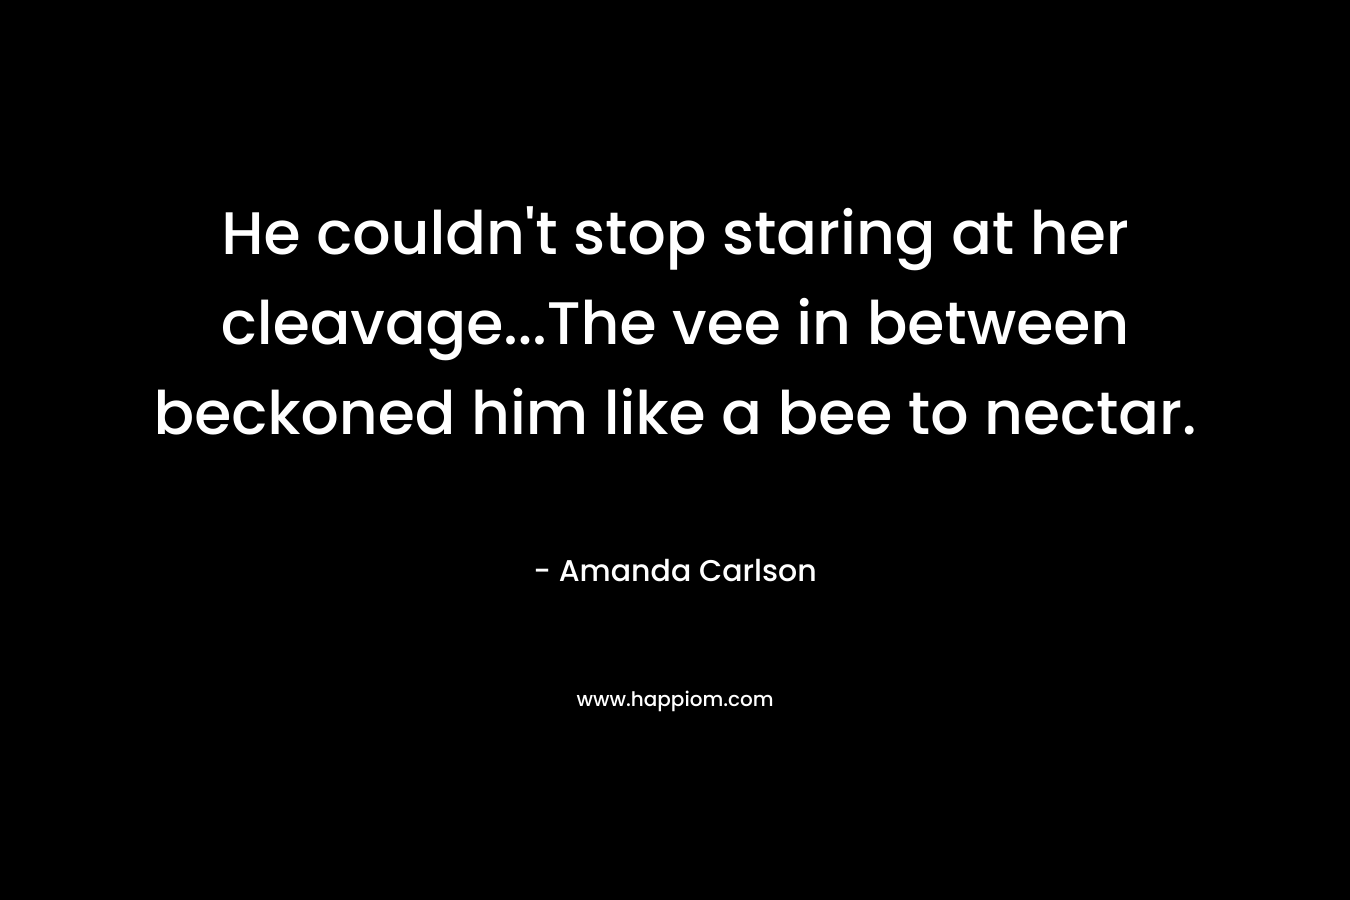 He couldn't stop staring at her cleavage...The vee in between beckoned him like a bee to nectar.